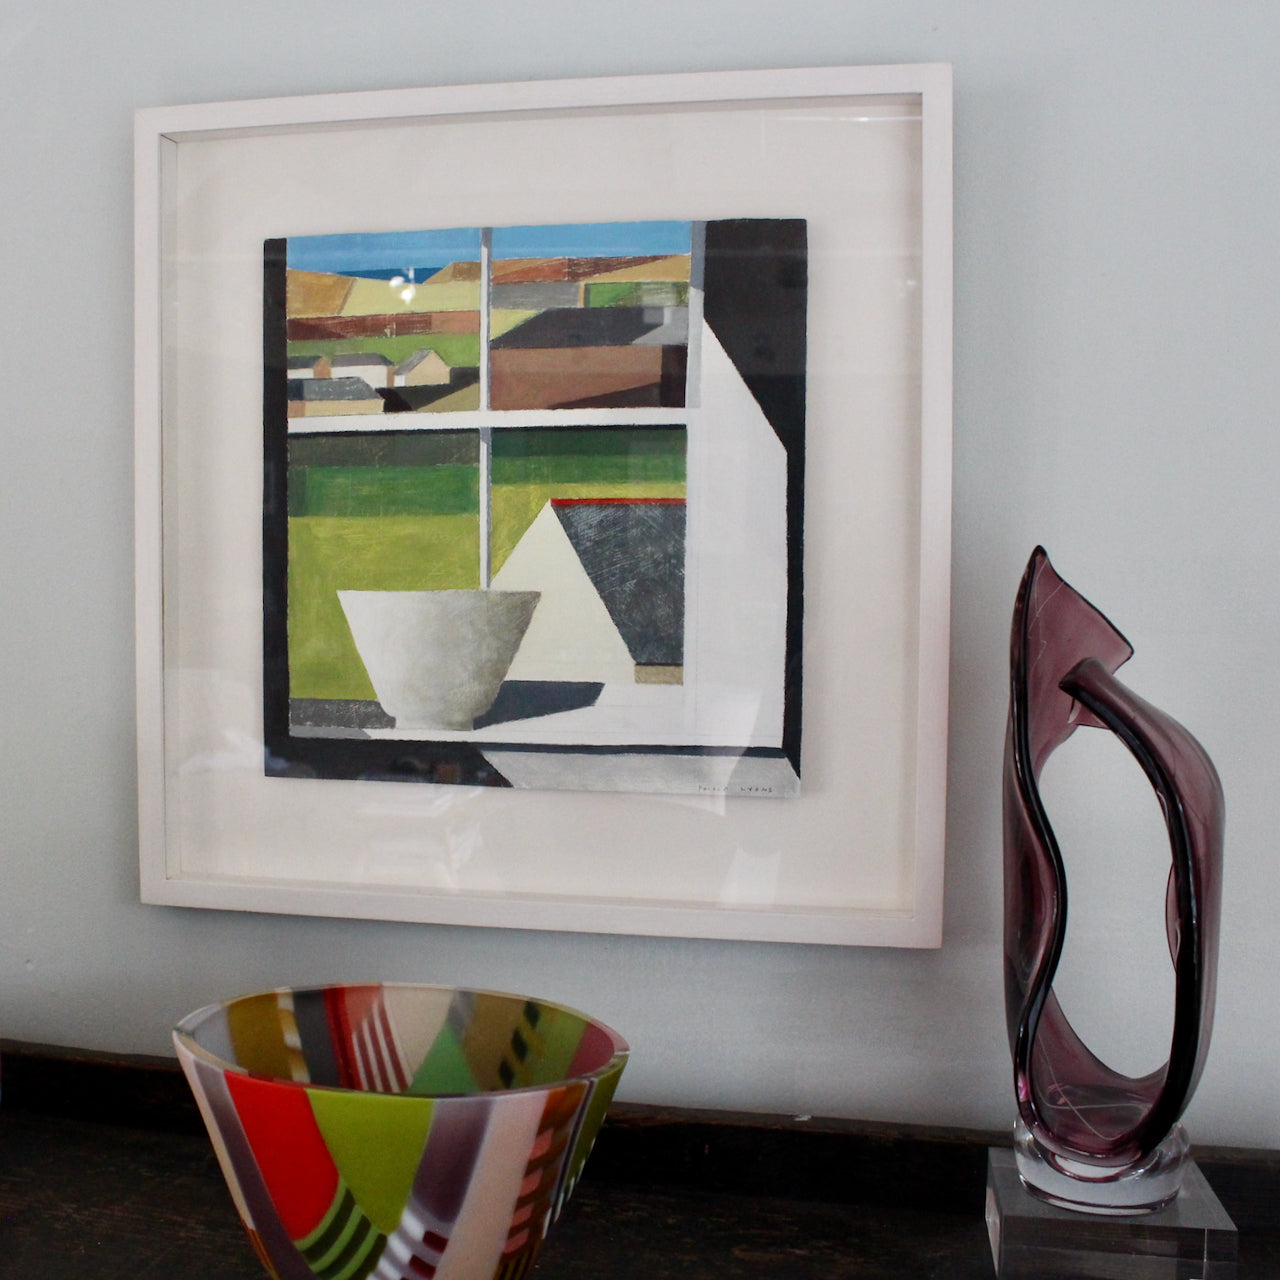 UK artist Philip Lyons, framed painting of white bowl on white window sill looking out to green landscape, houses and blue ocean in far distance.